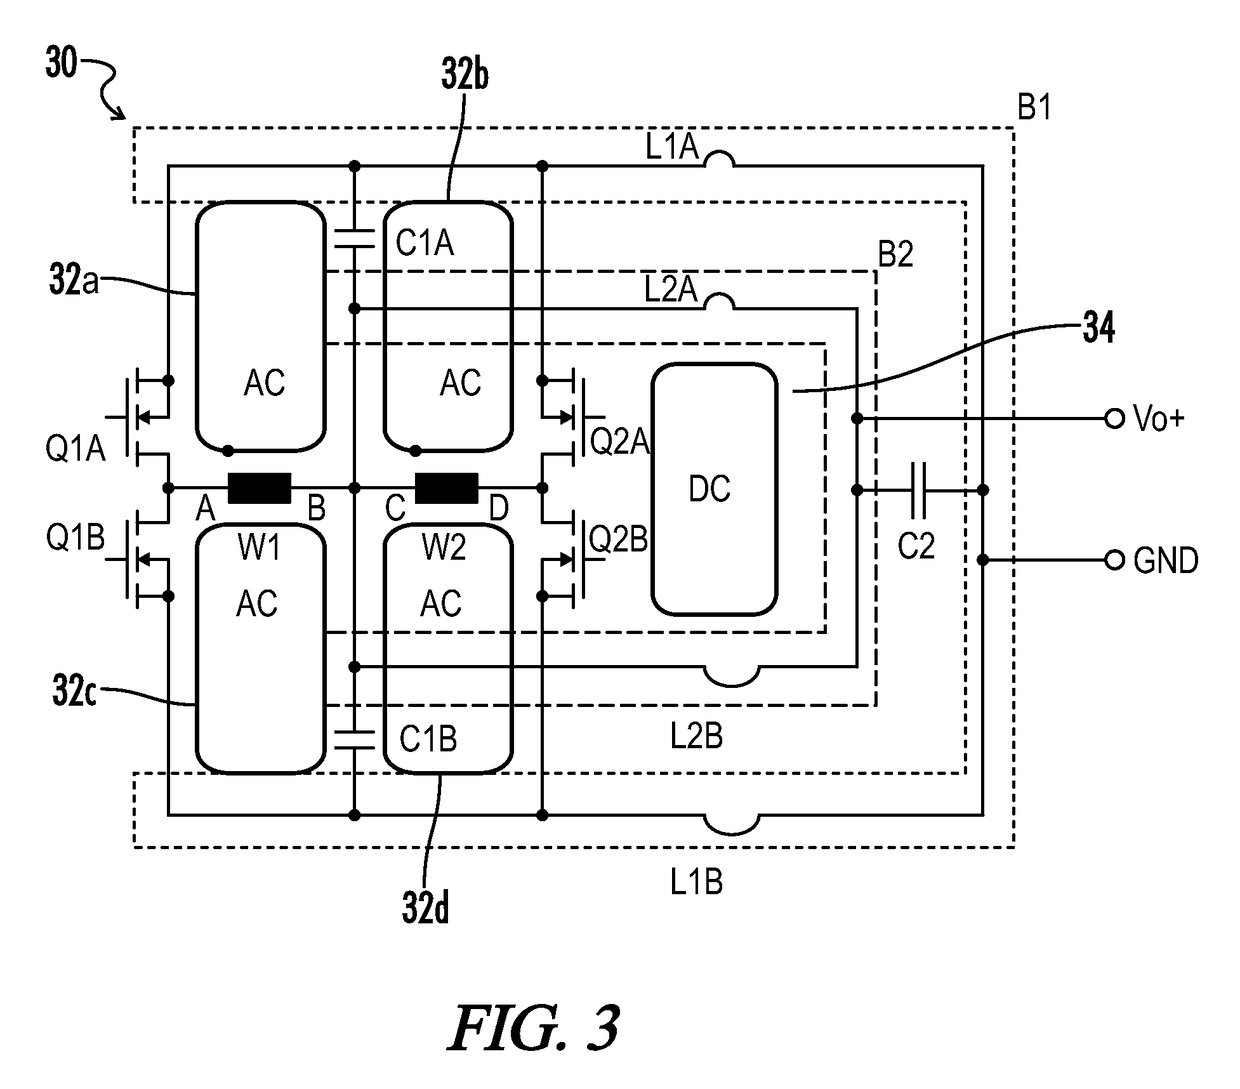 Power converter output stage using heat dissipating bus bars